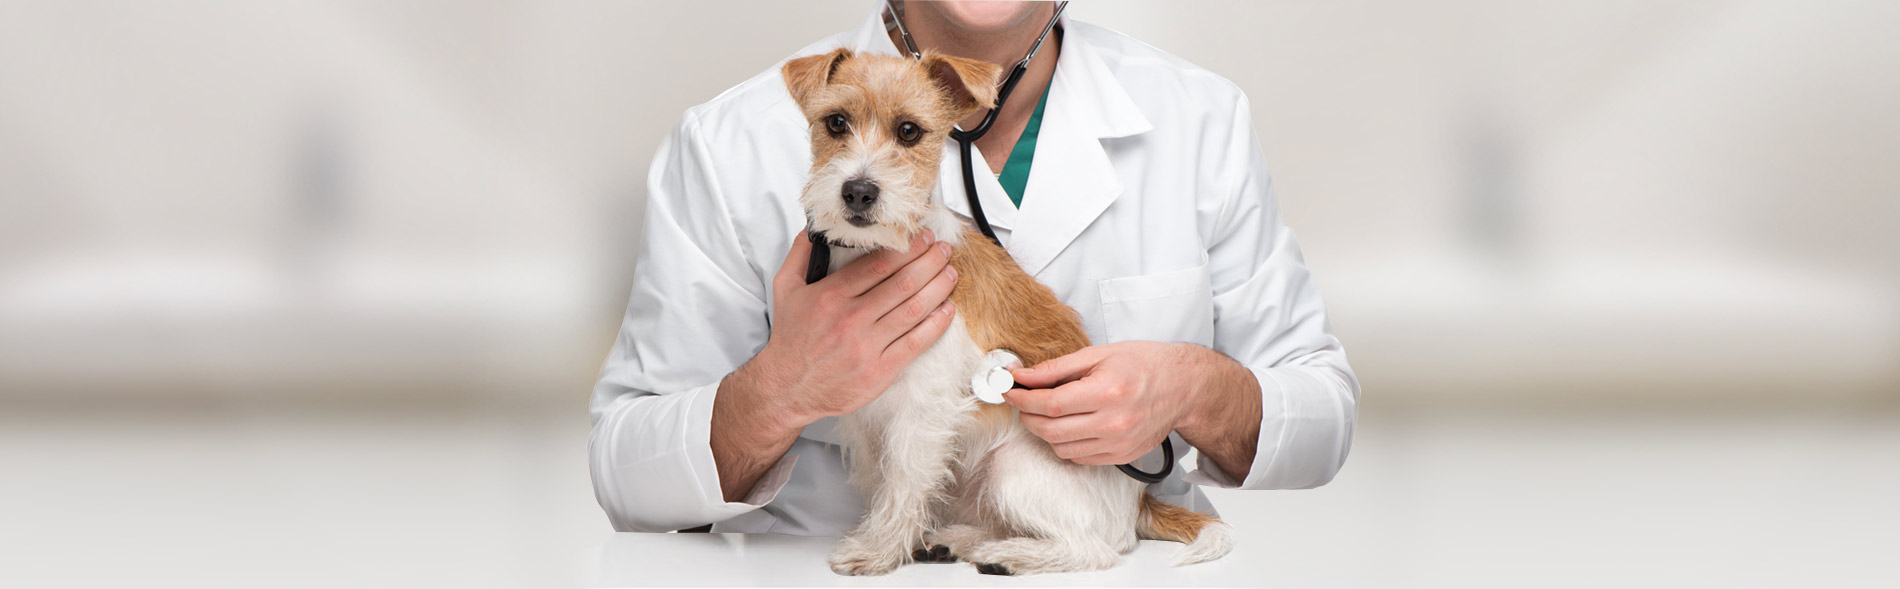 pet services, Collierville, veterinary, animal, hospital